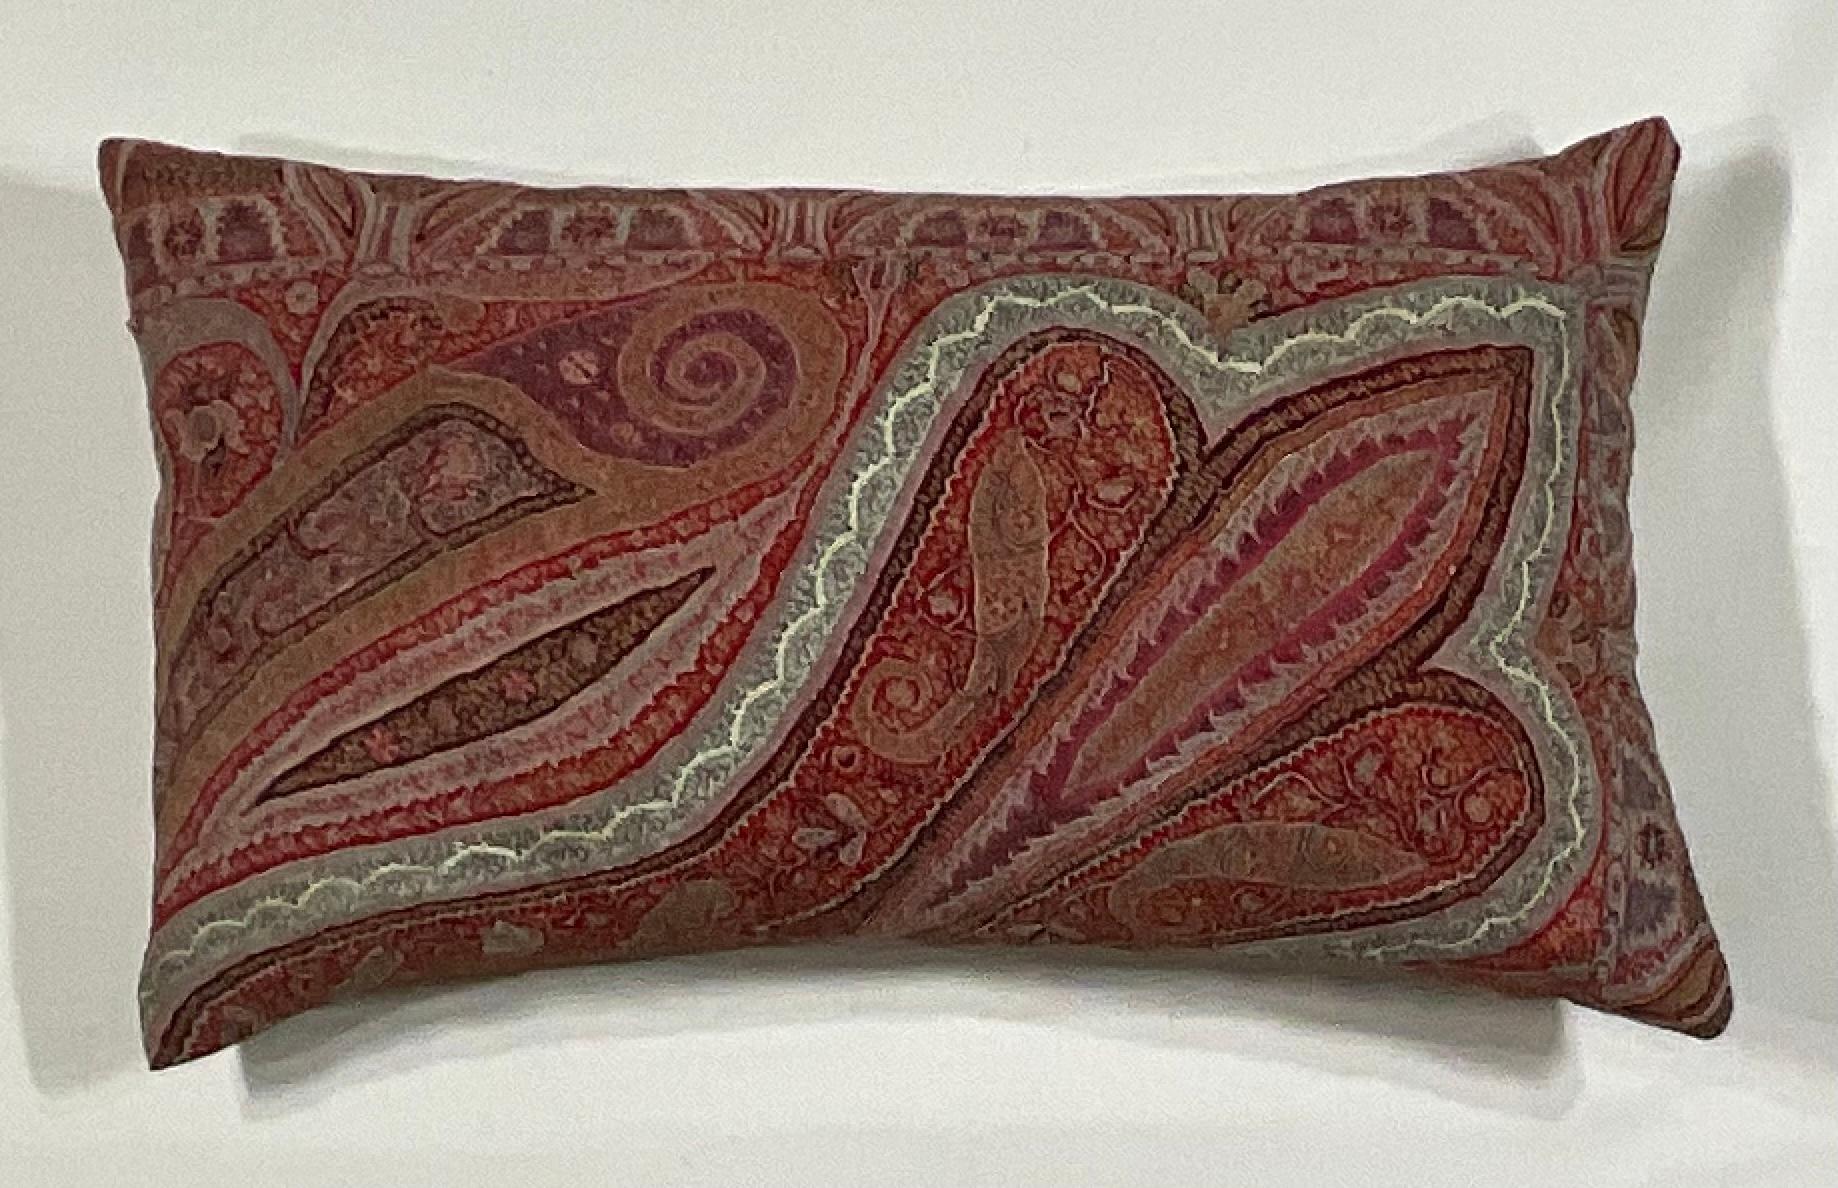 Single Antique Pillow Made from Kashmir Shawl 2